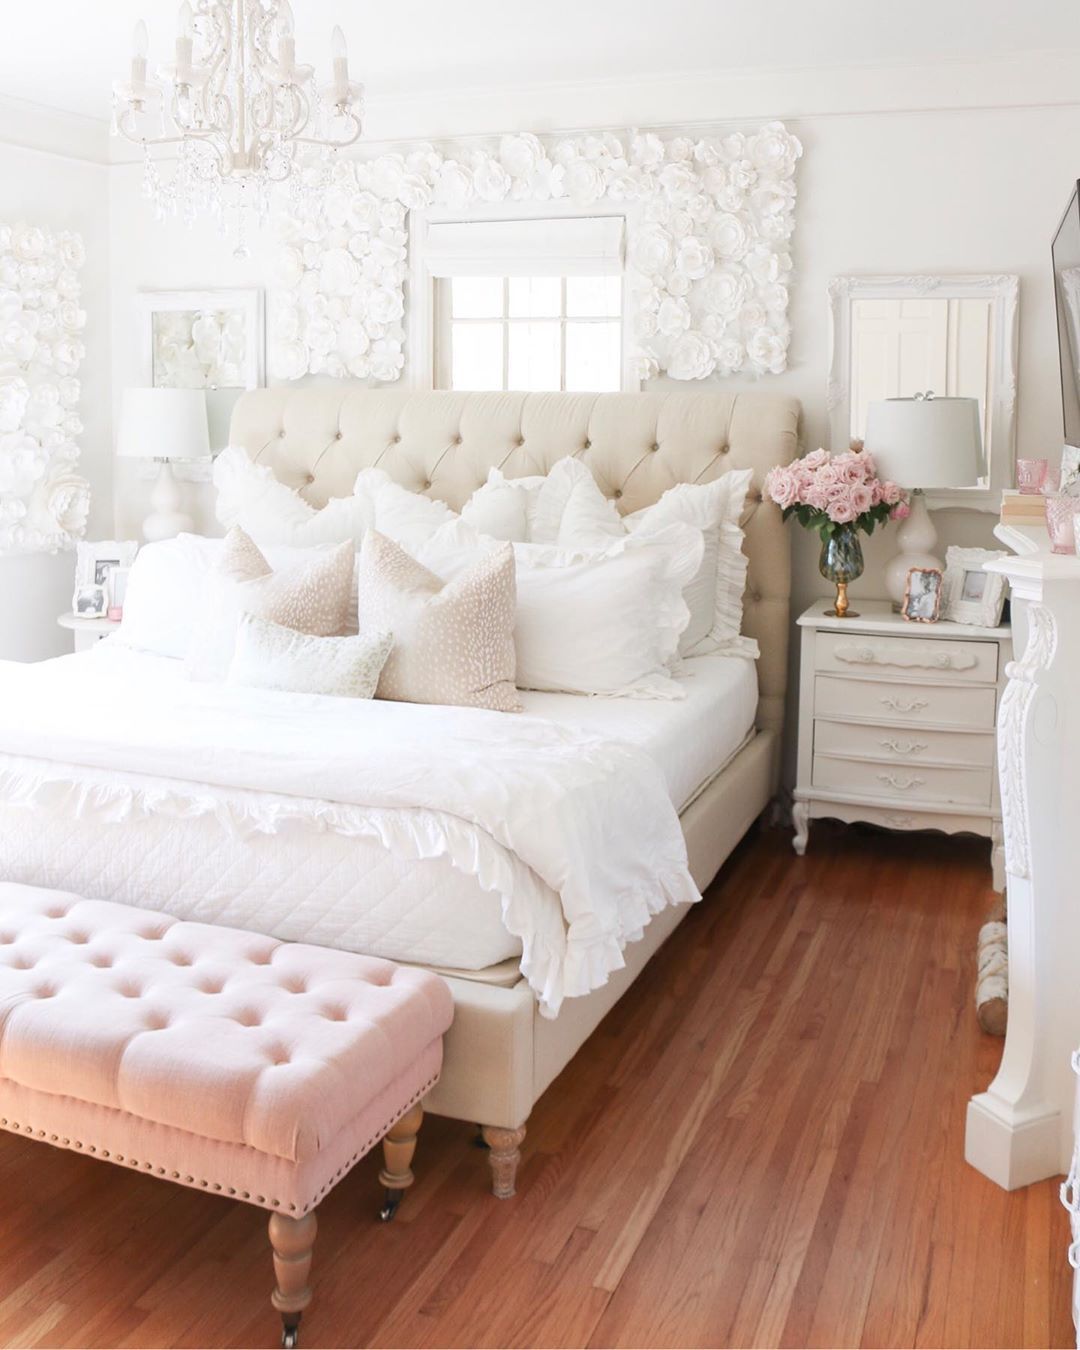 Feminine Bedroom with Pink Tufted Bench at the End of the Bed via @tanyarng